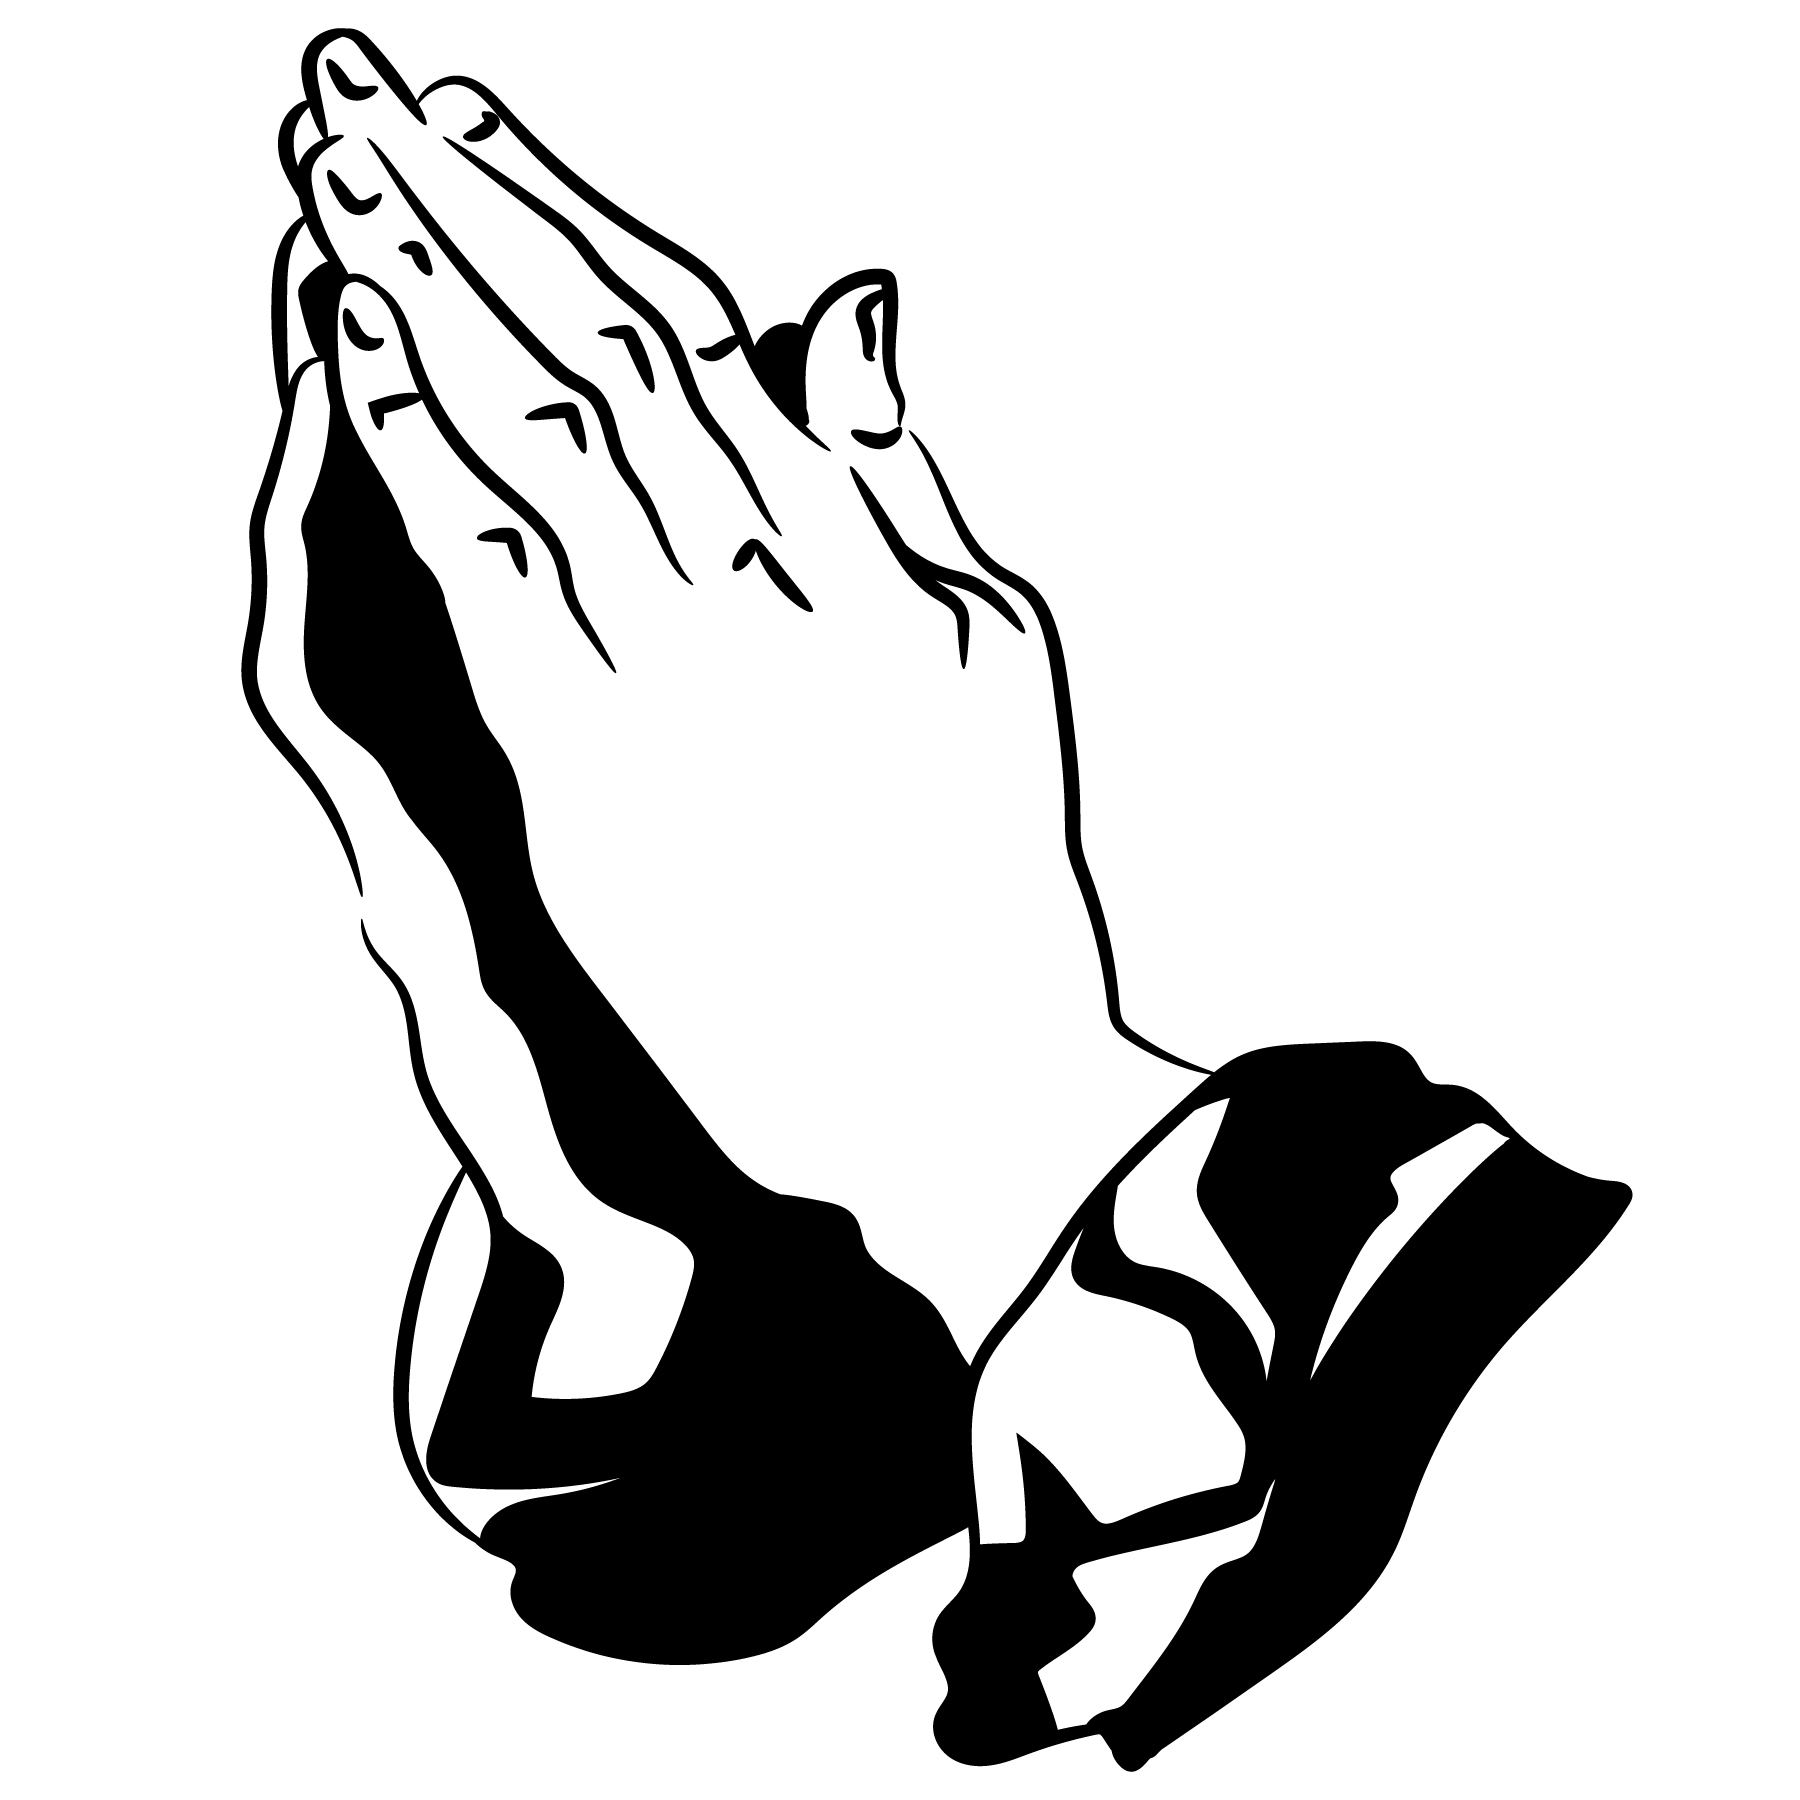 Praying Hands Printable Vector Svg Art Praying Hands Hand | Images and ...